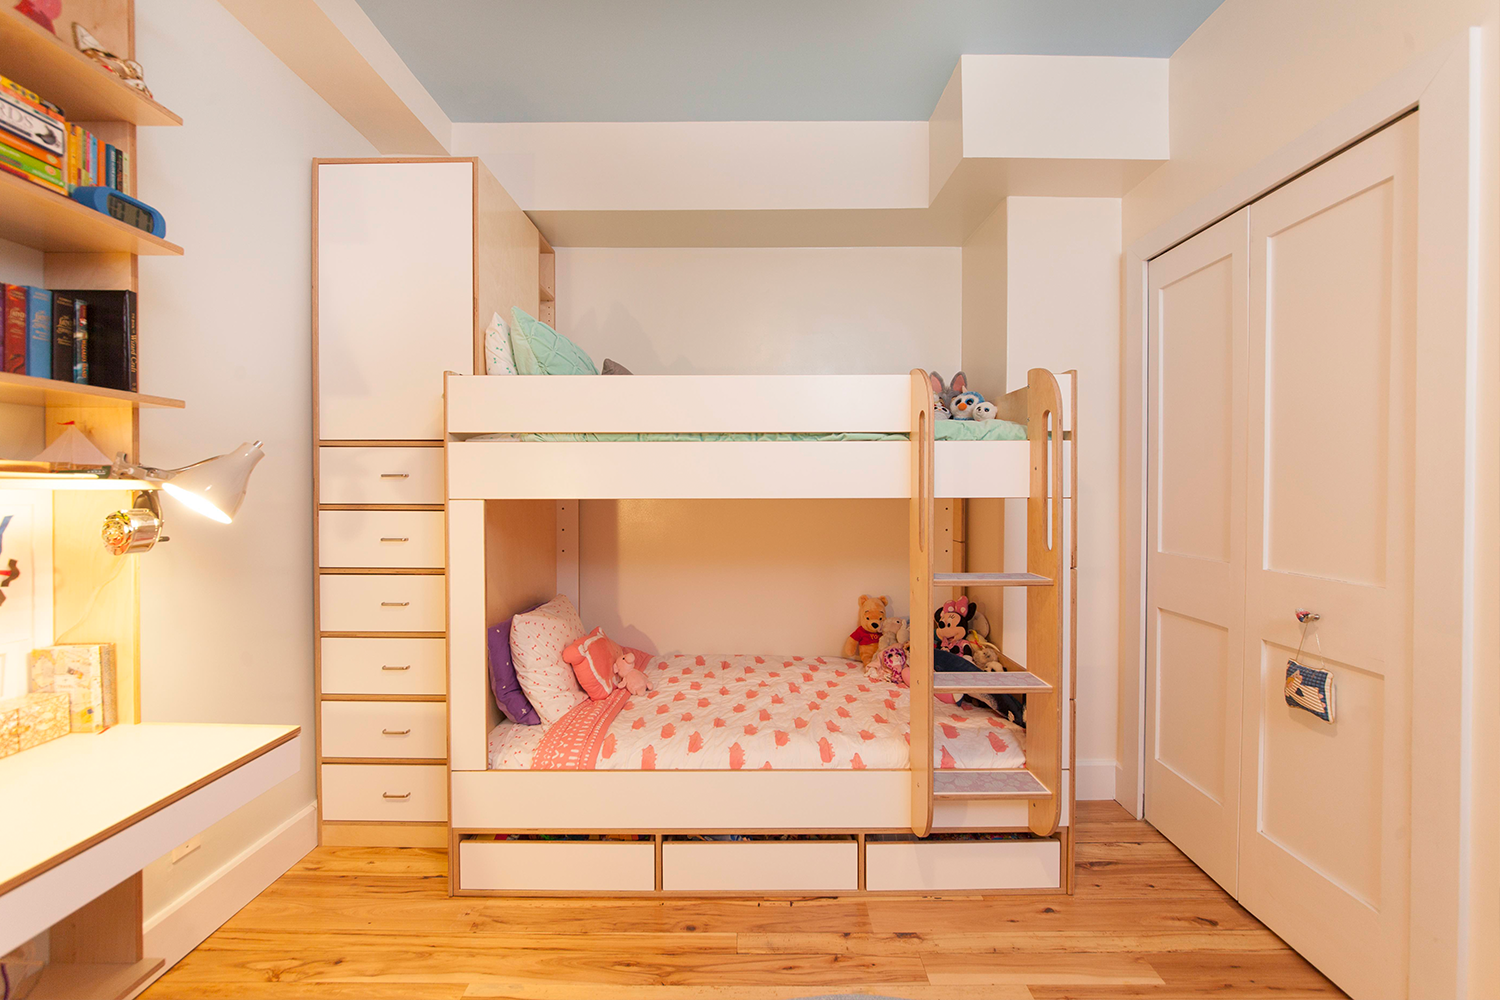 Children’s bedroom with bunk bed, toys, and wooden furniture.